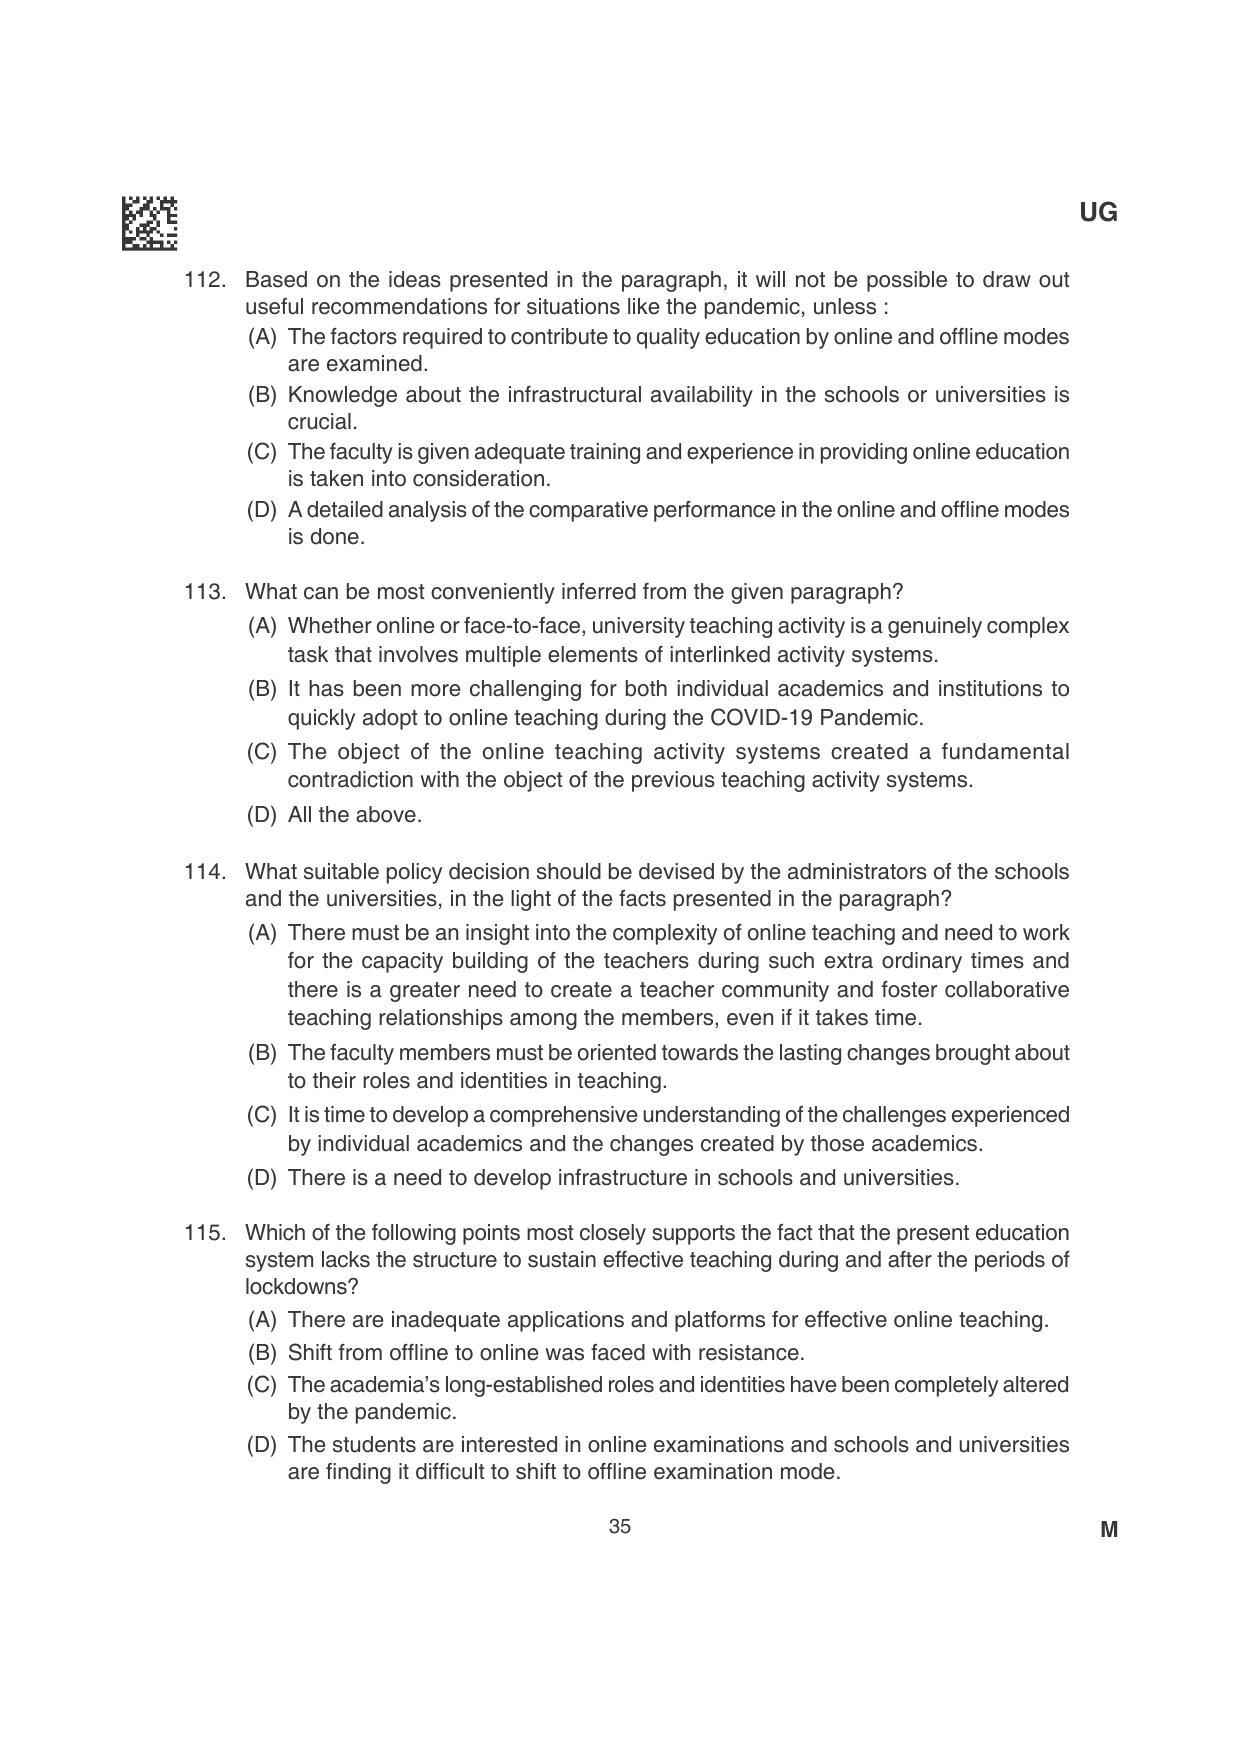 CLAT 2022 UG Question Papers - Page 35